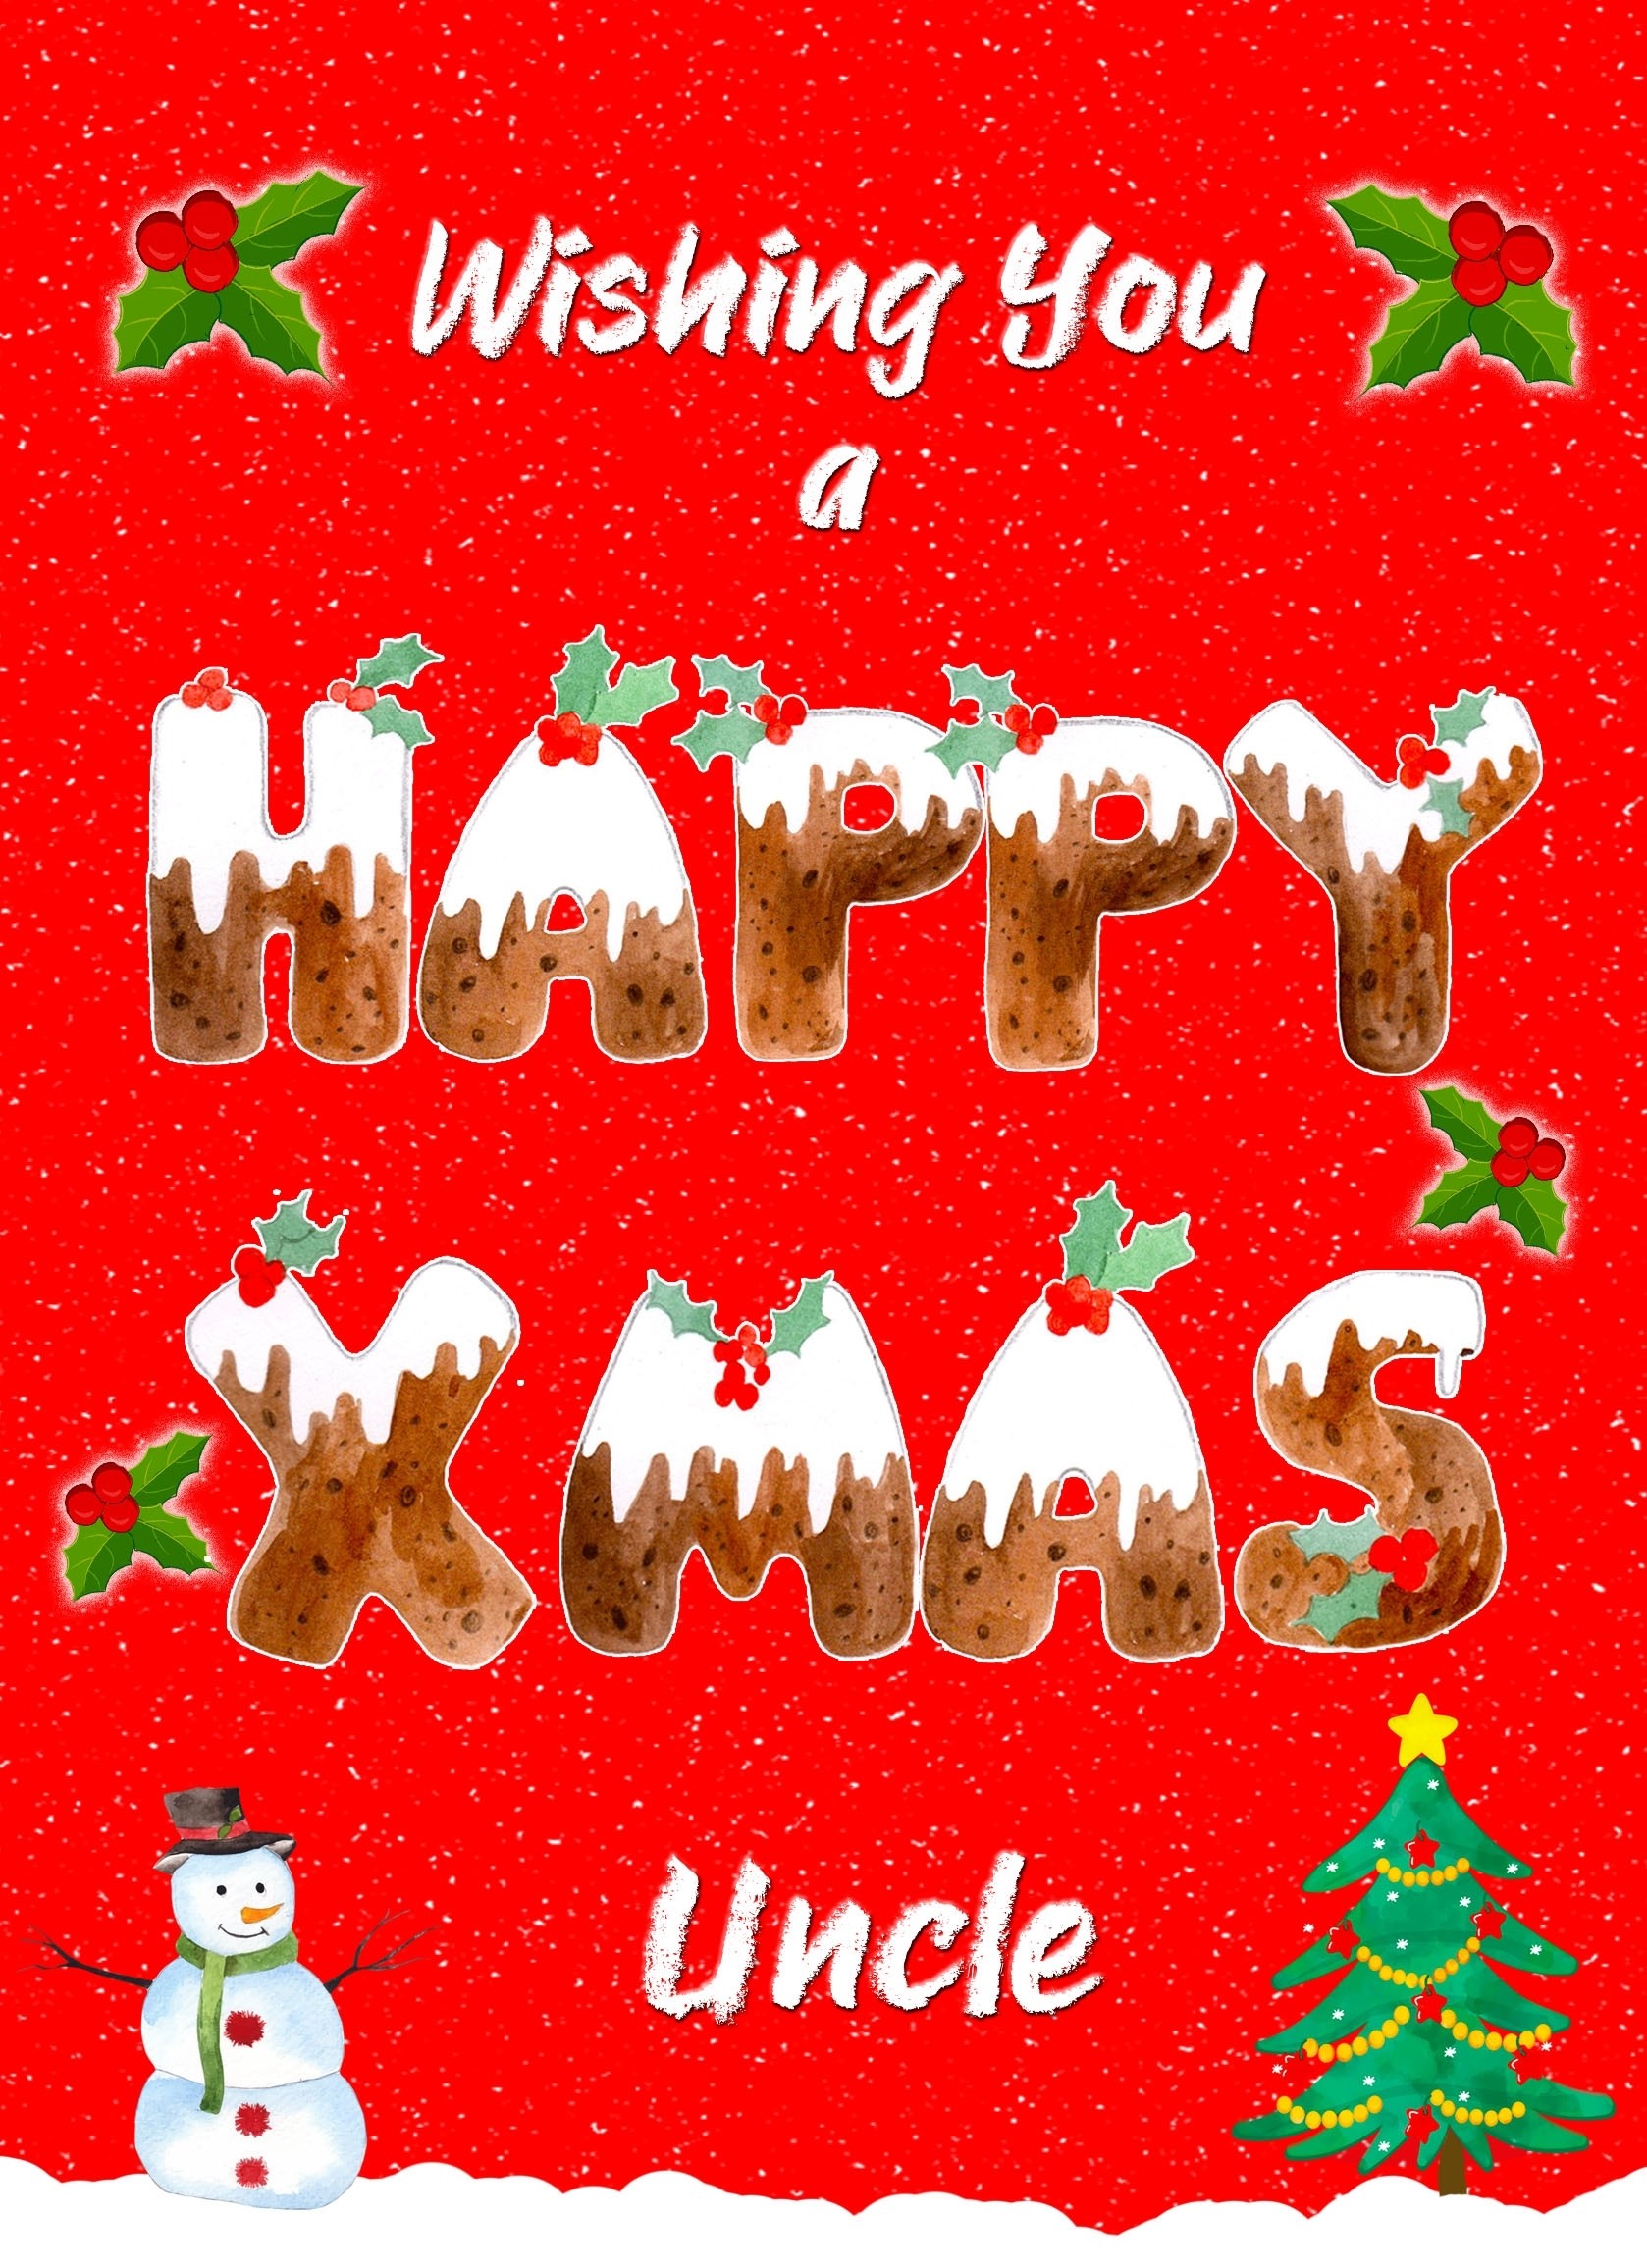 Happy Xmas Christmas Card For Uncle